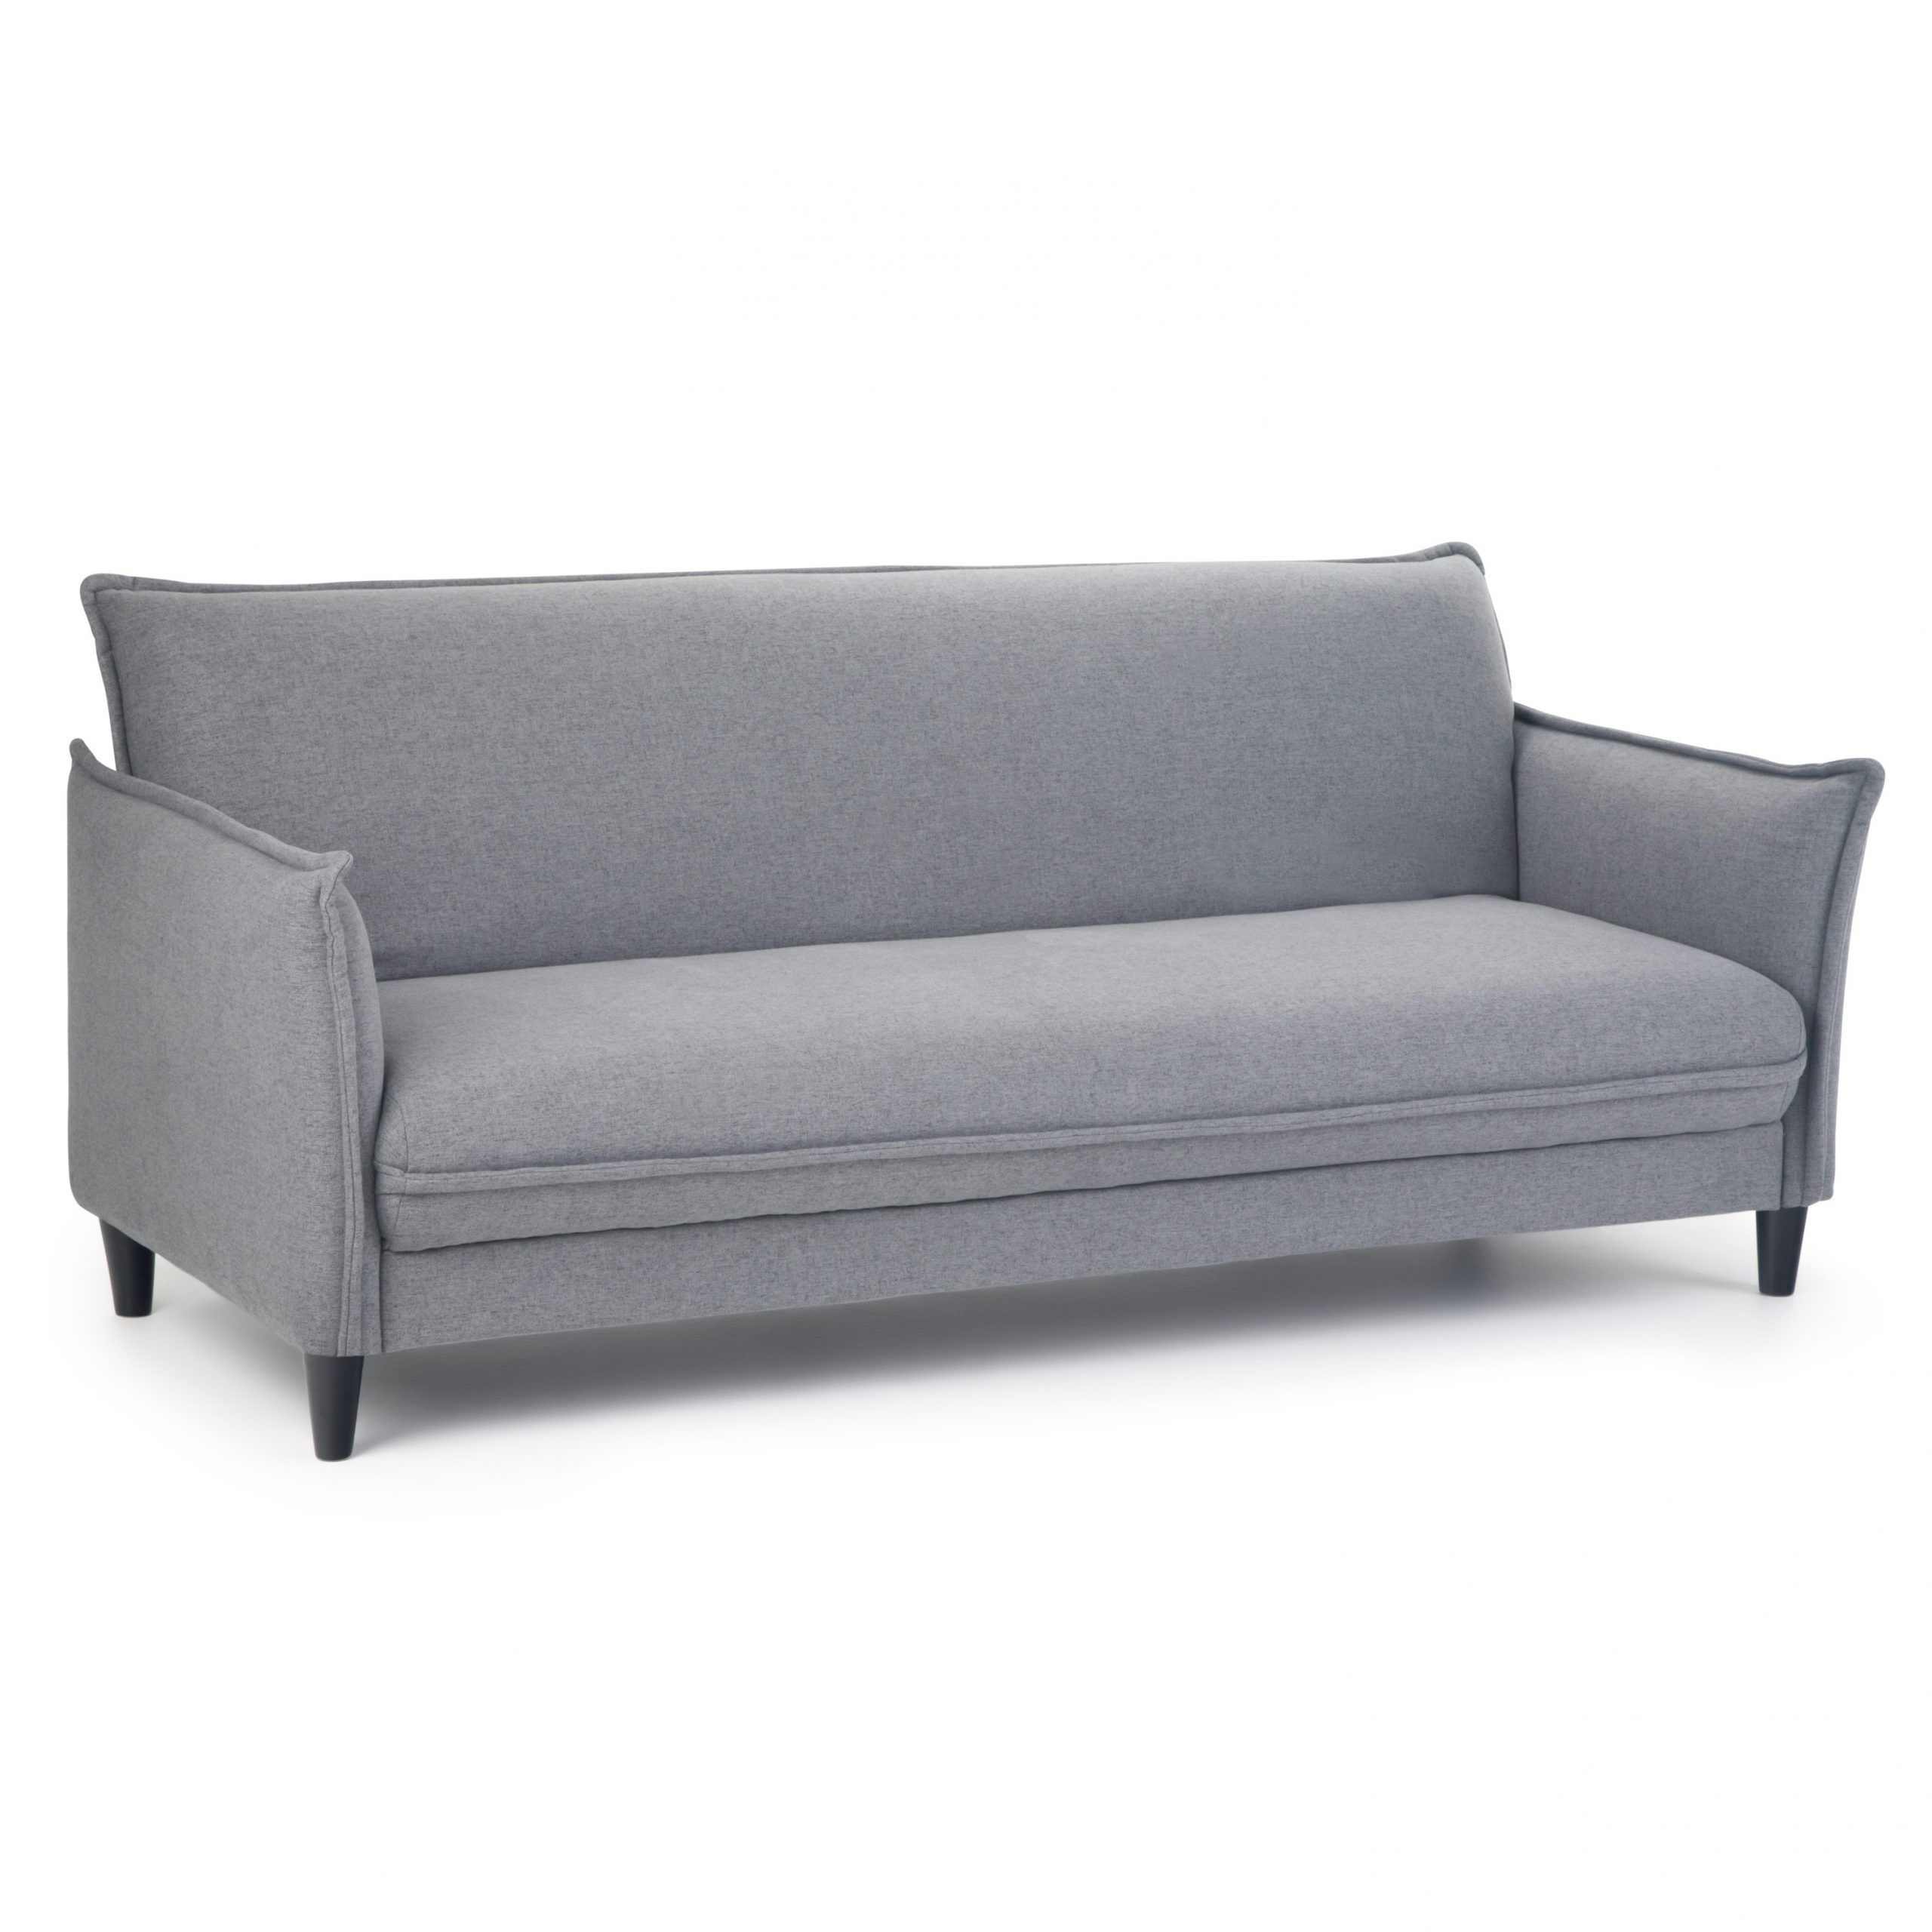 Brooklyn + Max Danville Contemporary 81 Inch Wide Sofa Bed Intended For Newest Gneiss Modern Linen Sectional Sofas Slate Gray (View 1 of 20)